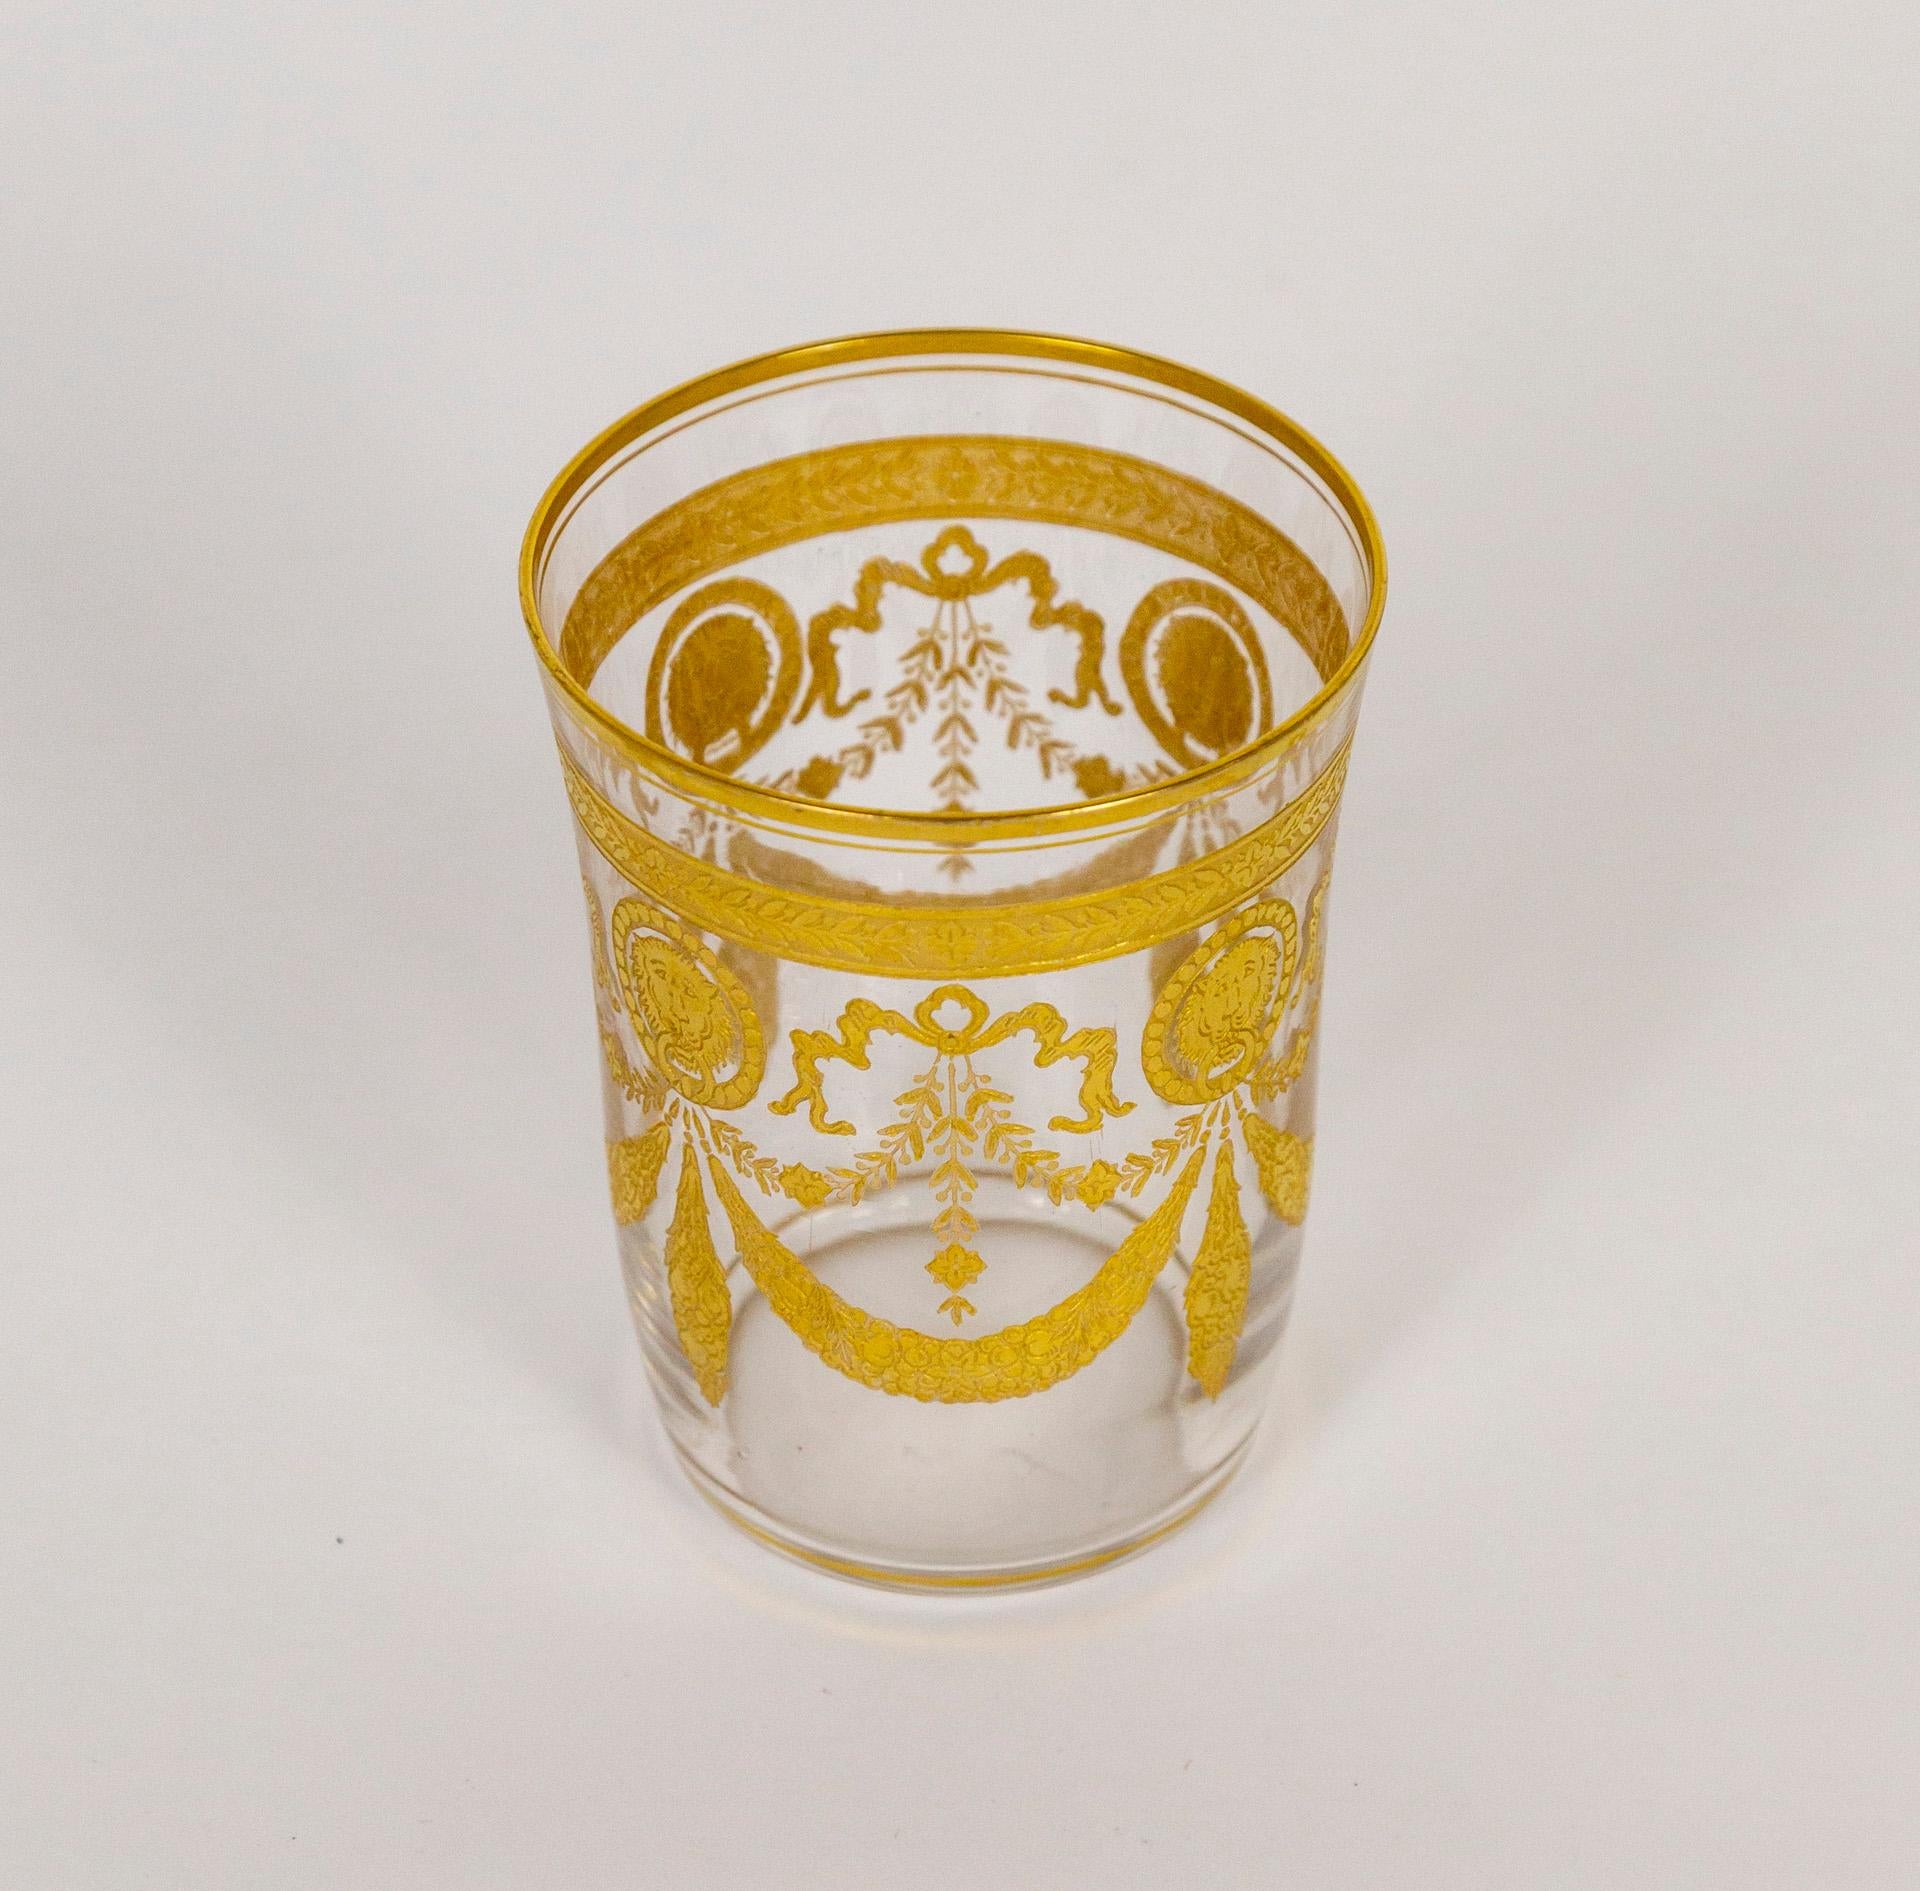 A set of 11, antique, mouth-blown, tumblers; etched, with an intricate gold motif of ribbon, floral garlands, and lion faces- the 